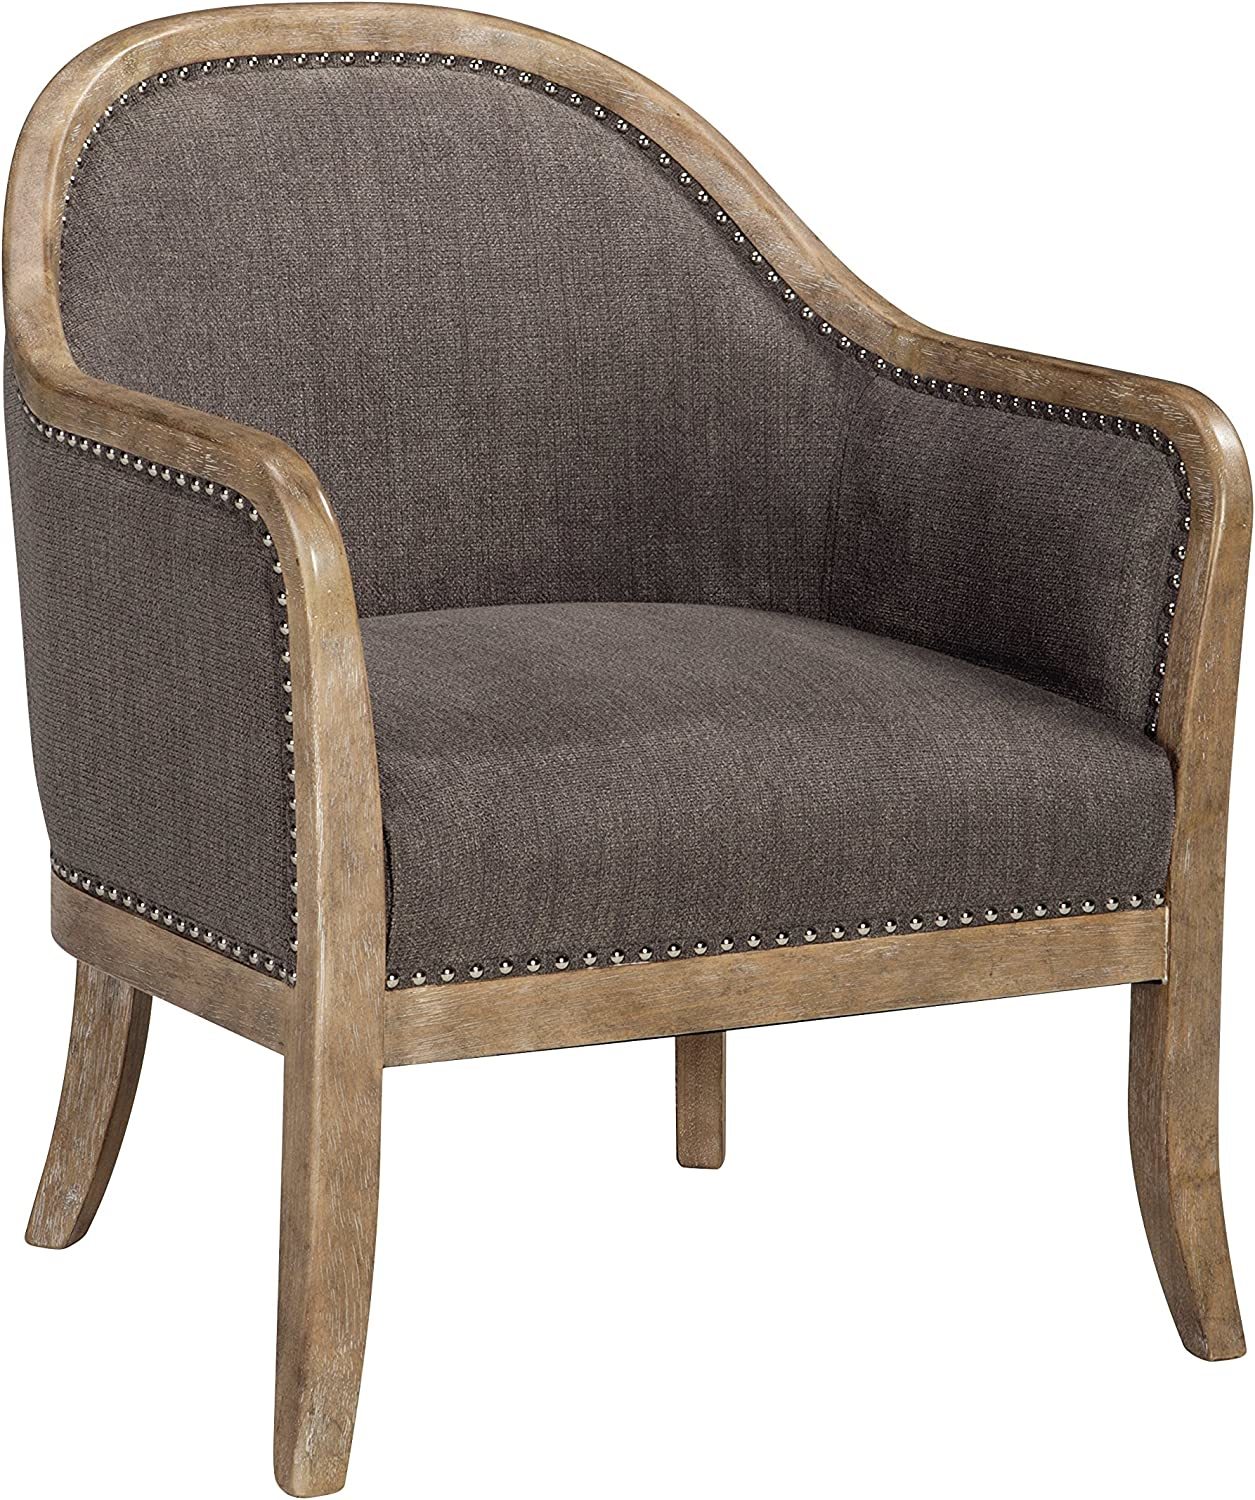 Signature Design by Ashley Engineer Vintage Casual Accent Chair with, Brown - $419.99